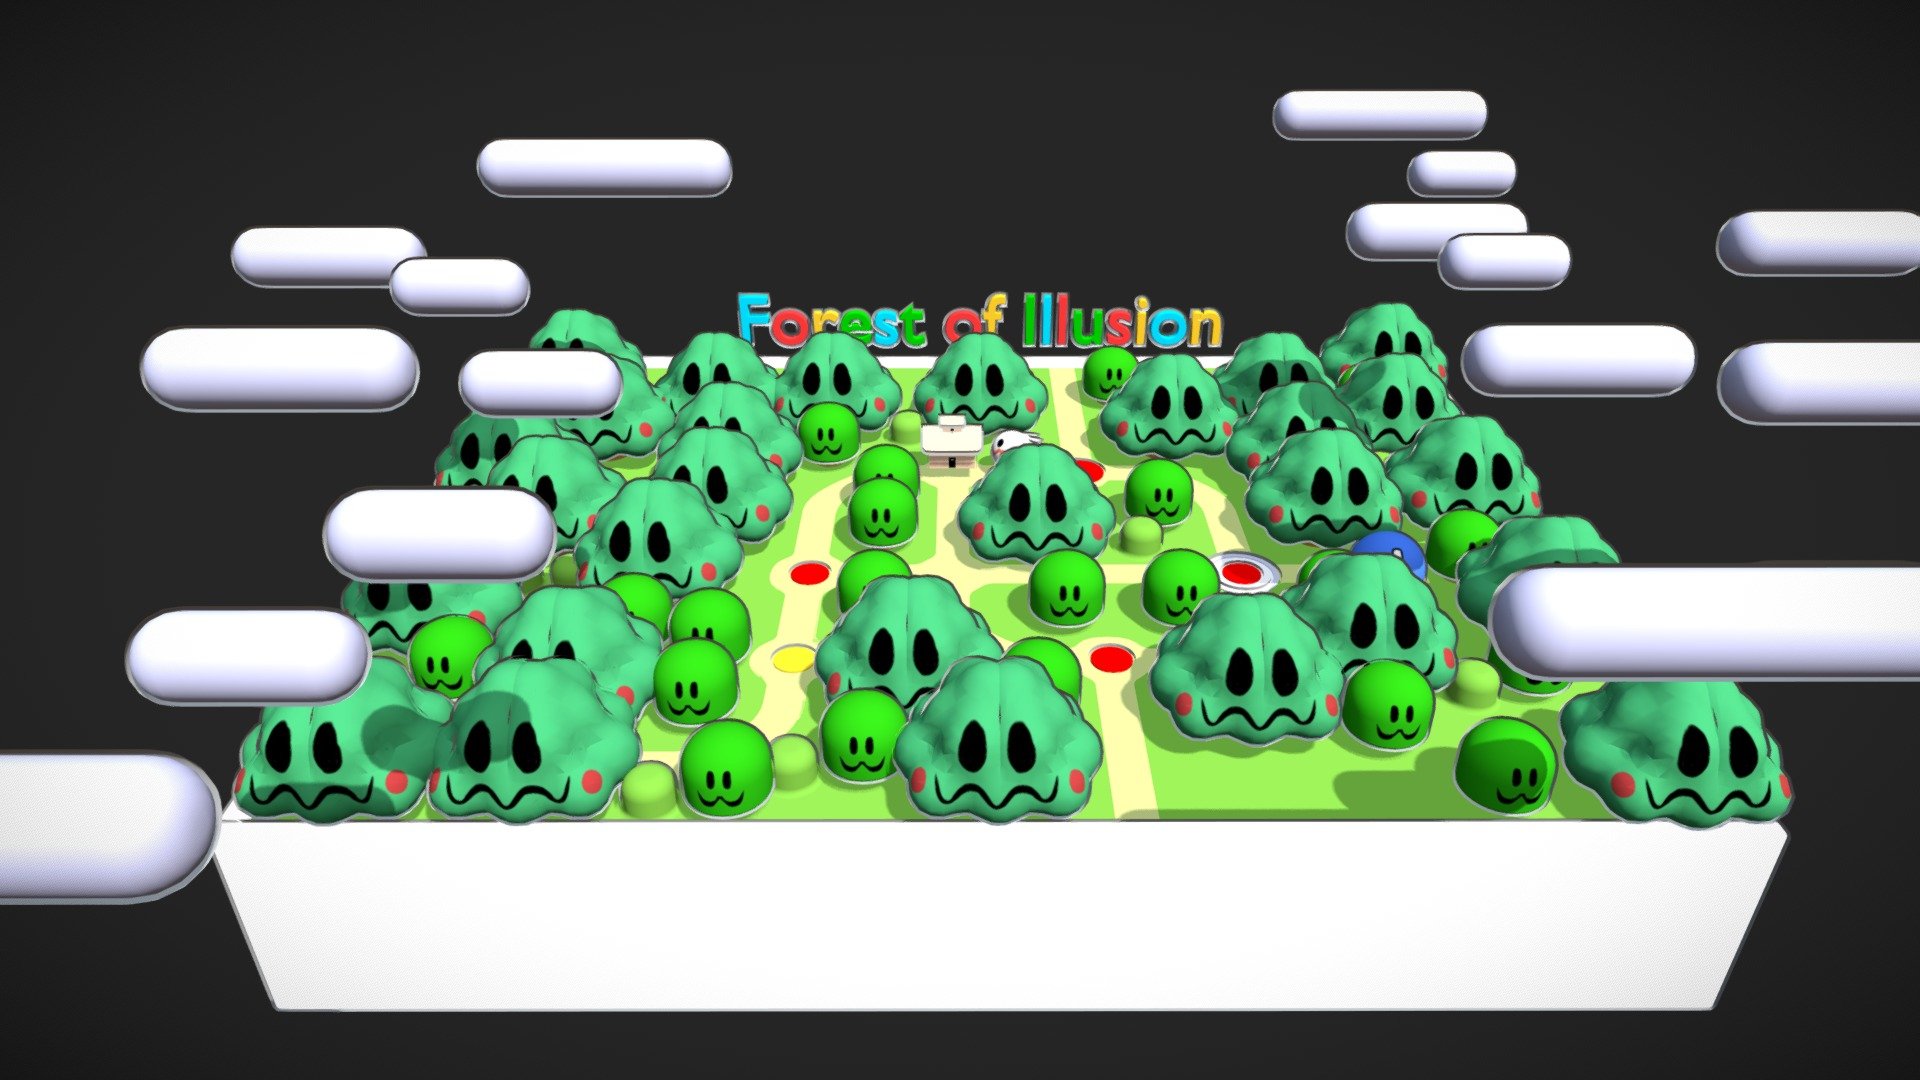 super-mario-world-forest-of-illusion-3d-model-by-wallace-wyslas